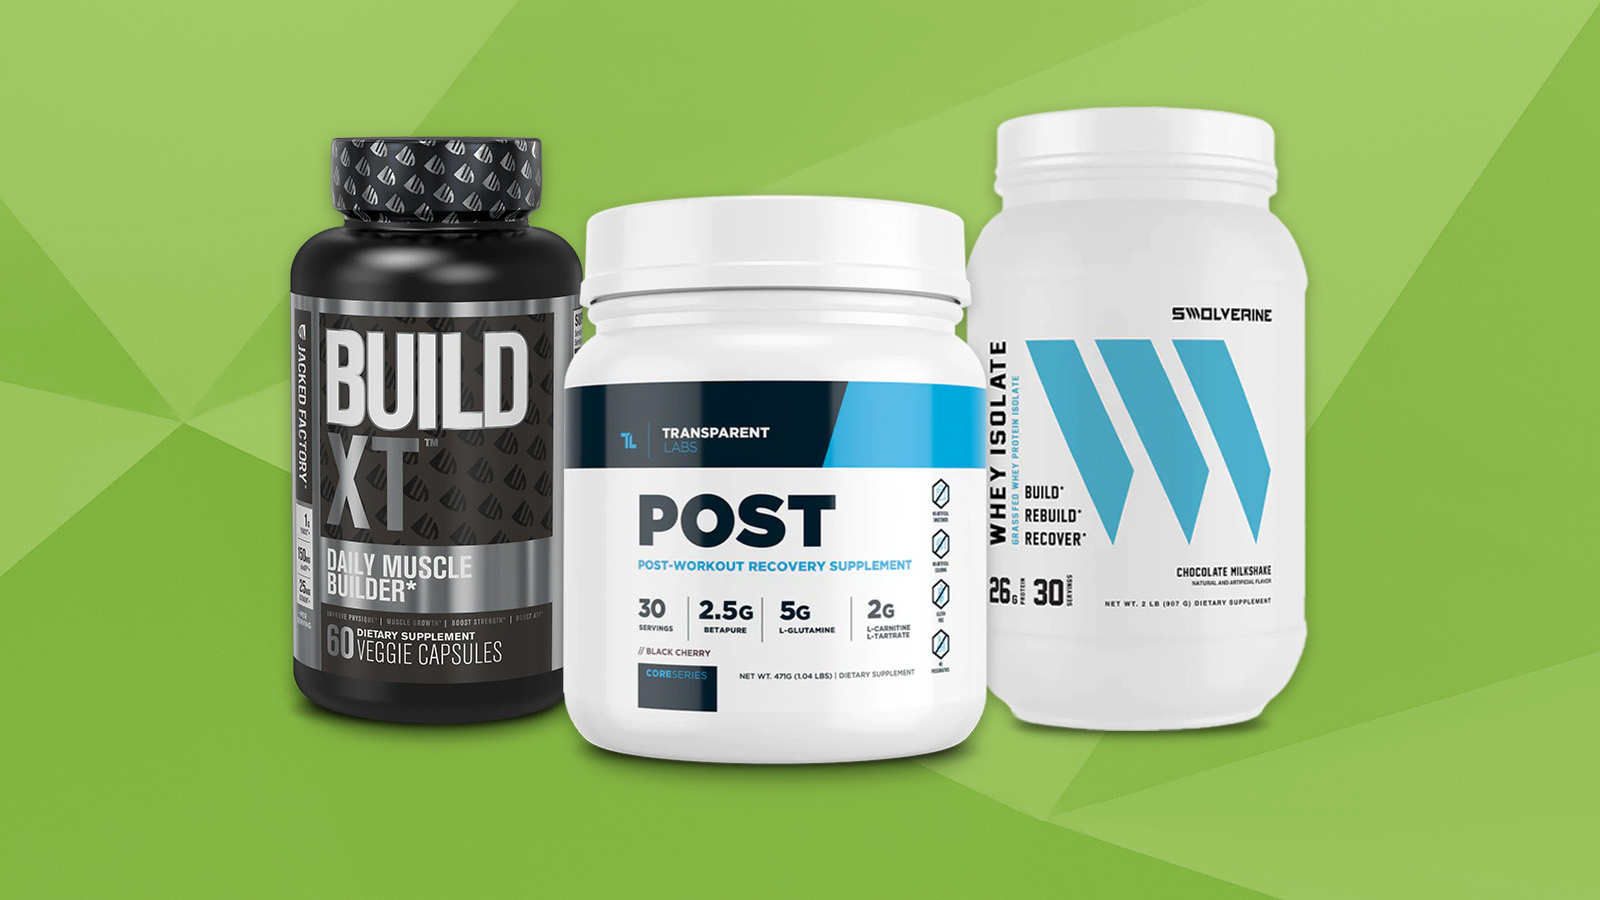 Post-workout supplements for youth